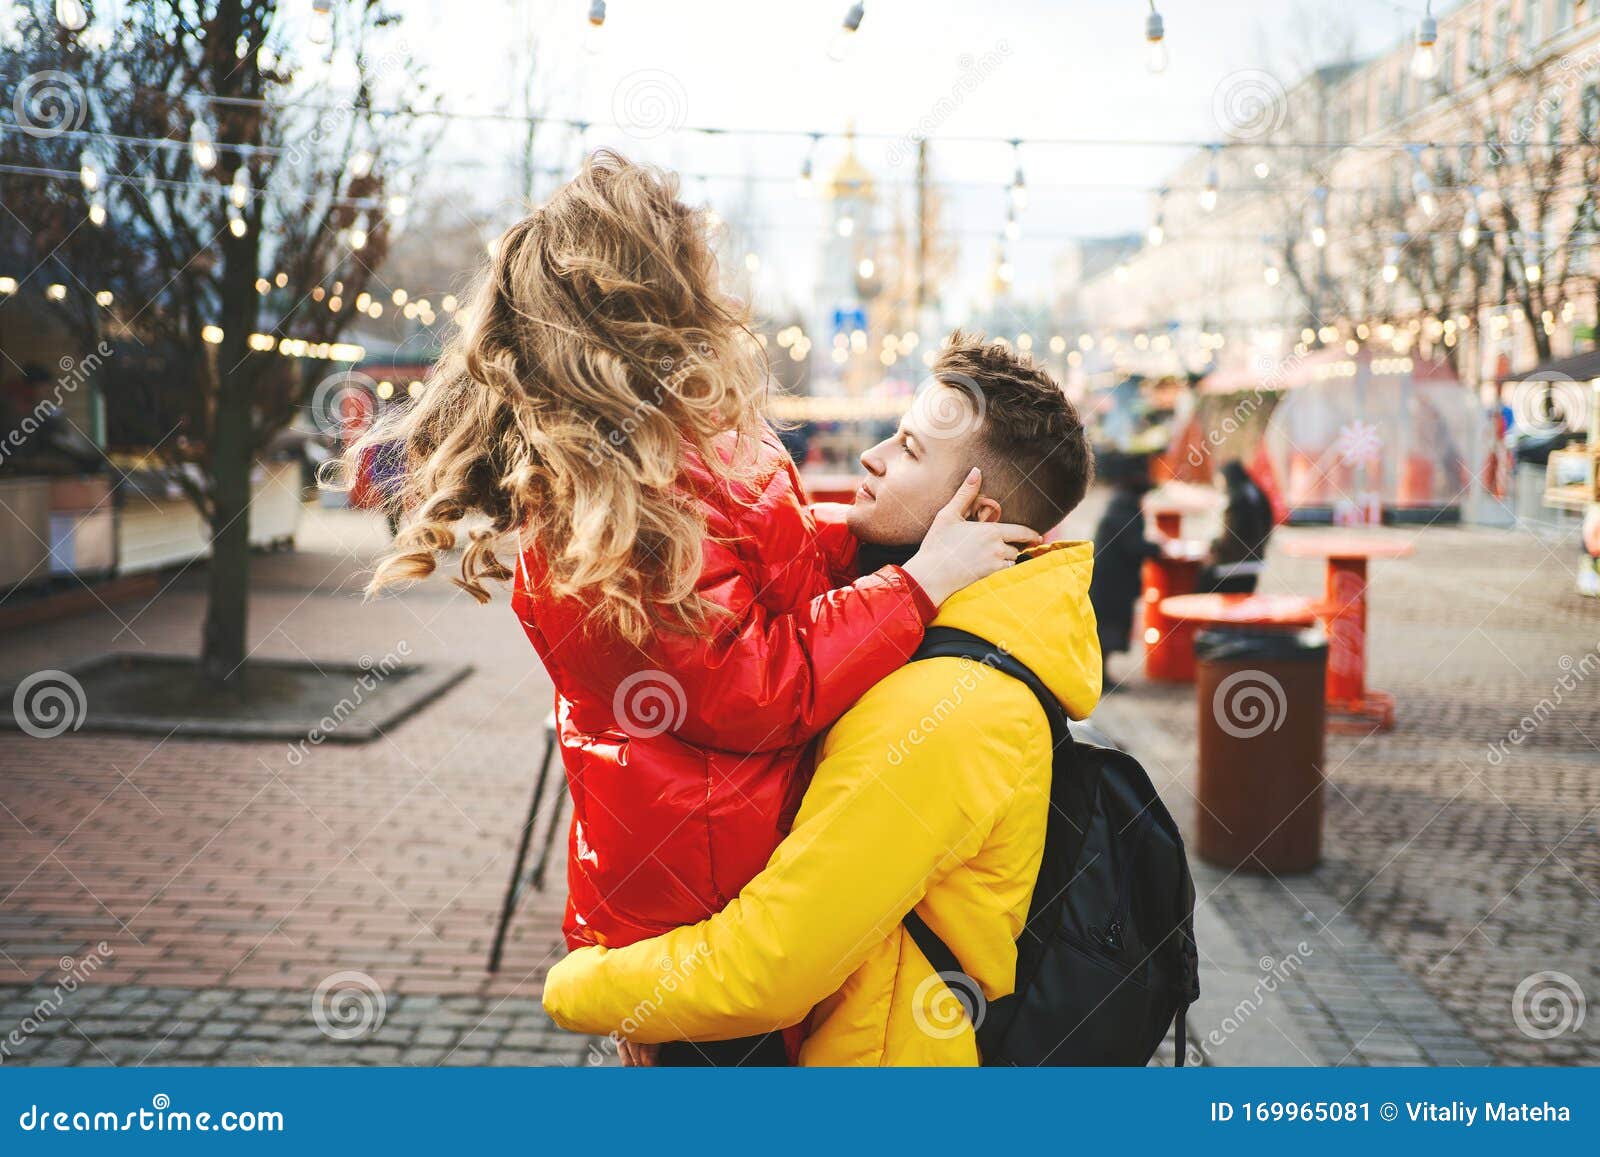 Interracial Couple Stock Images, Royalty-Free Images 